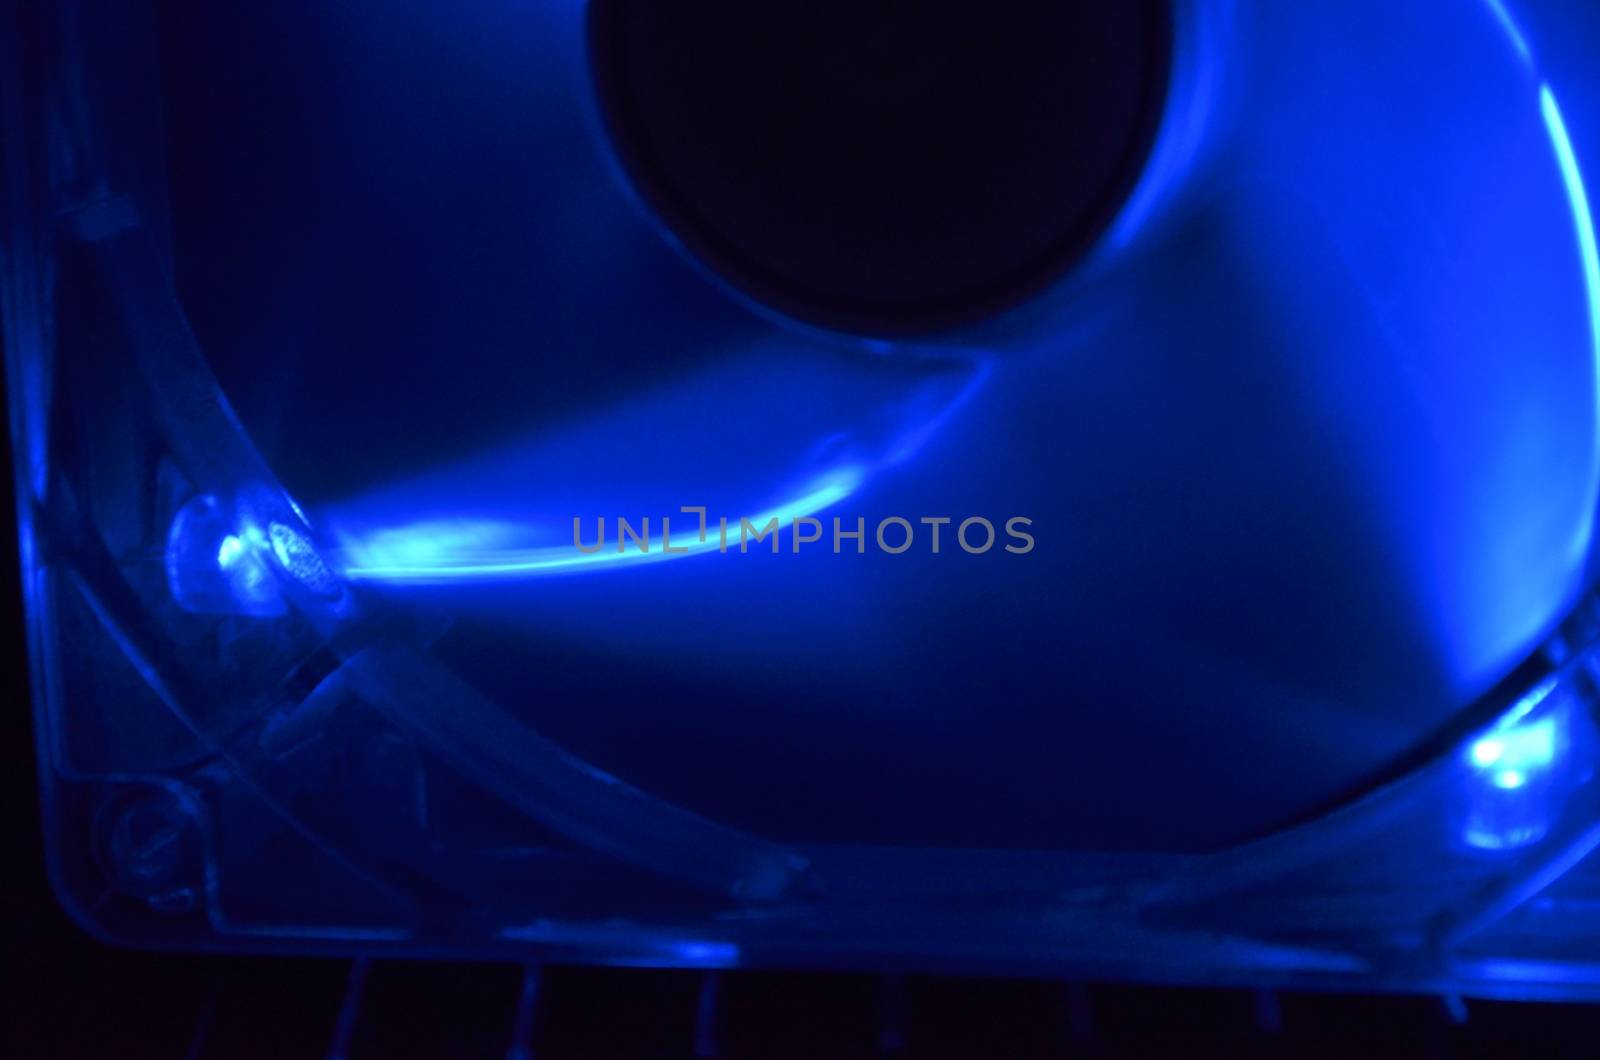 Fan blades of computer processor cooler. by romeocharly